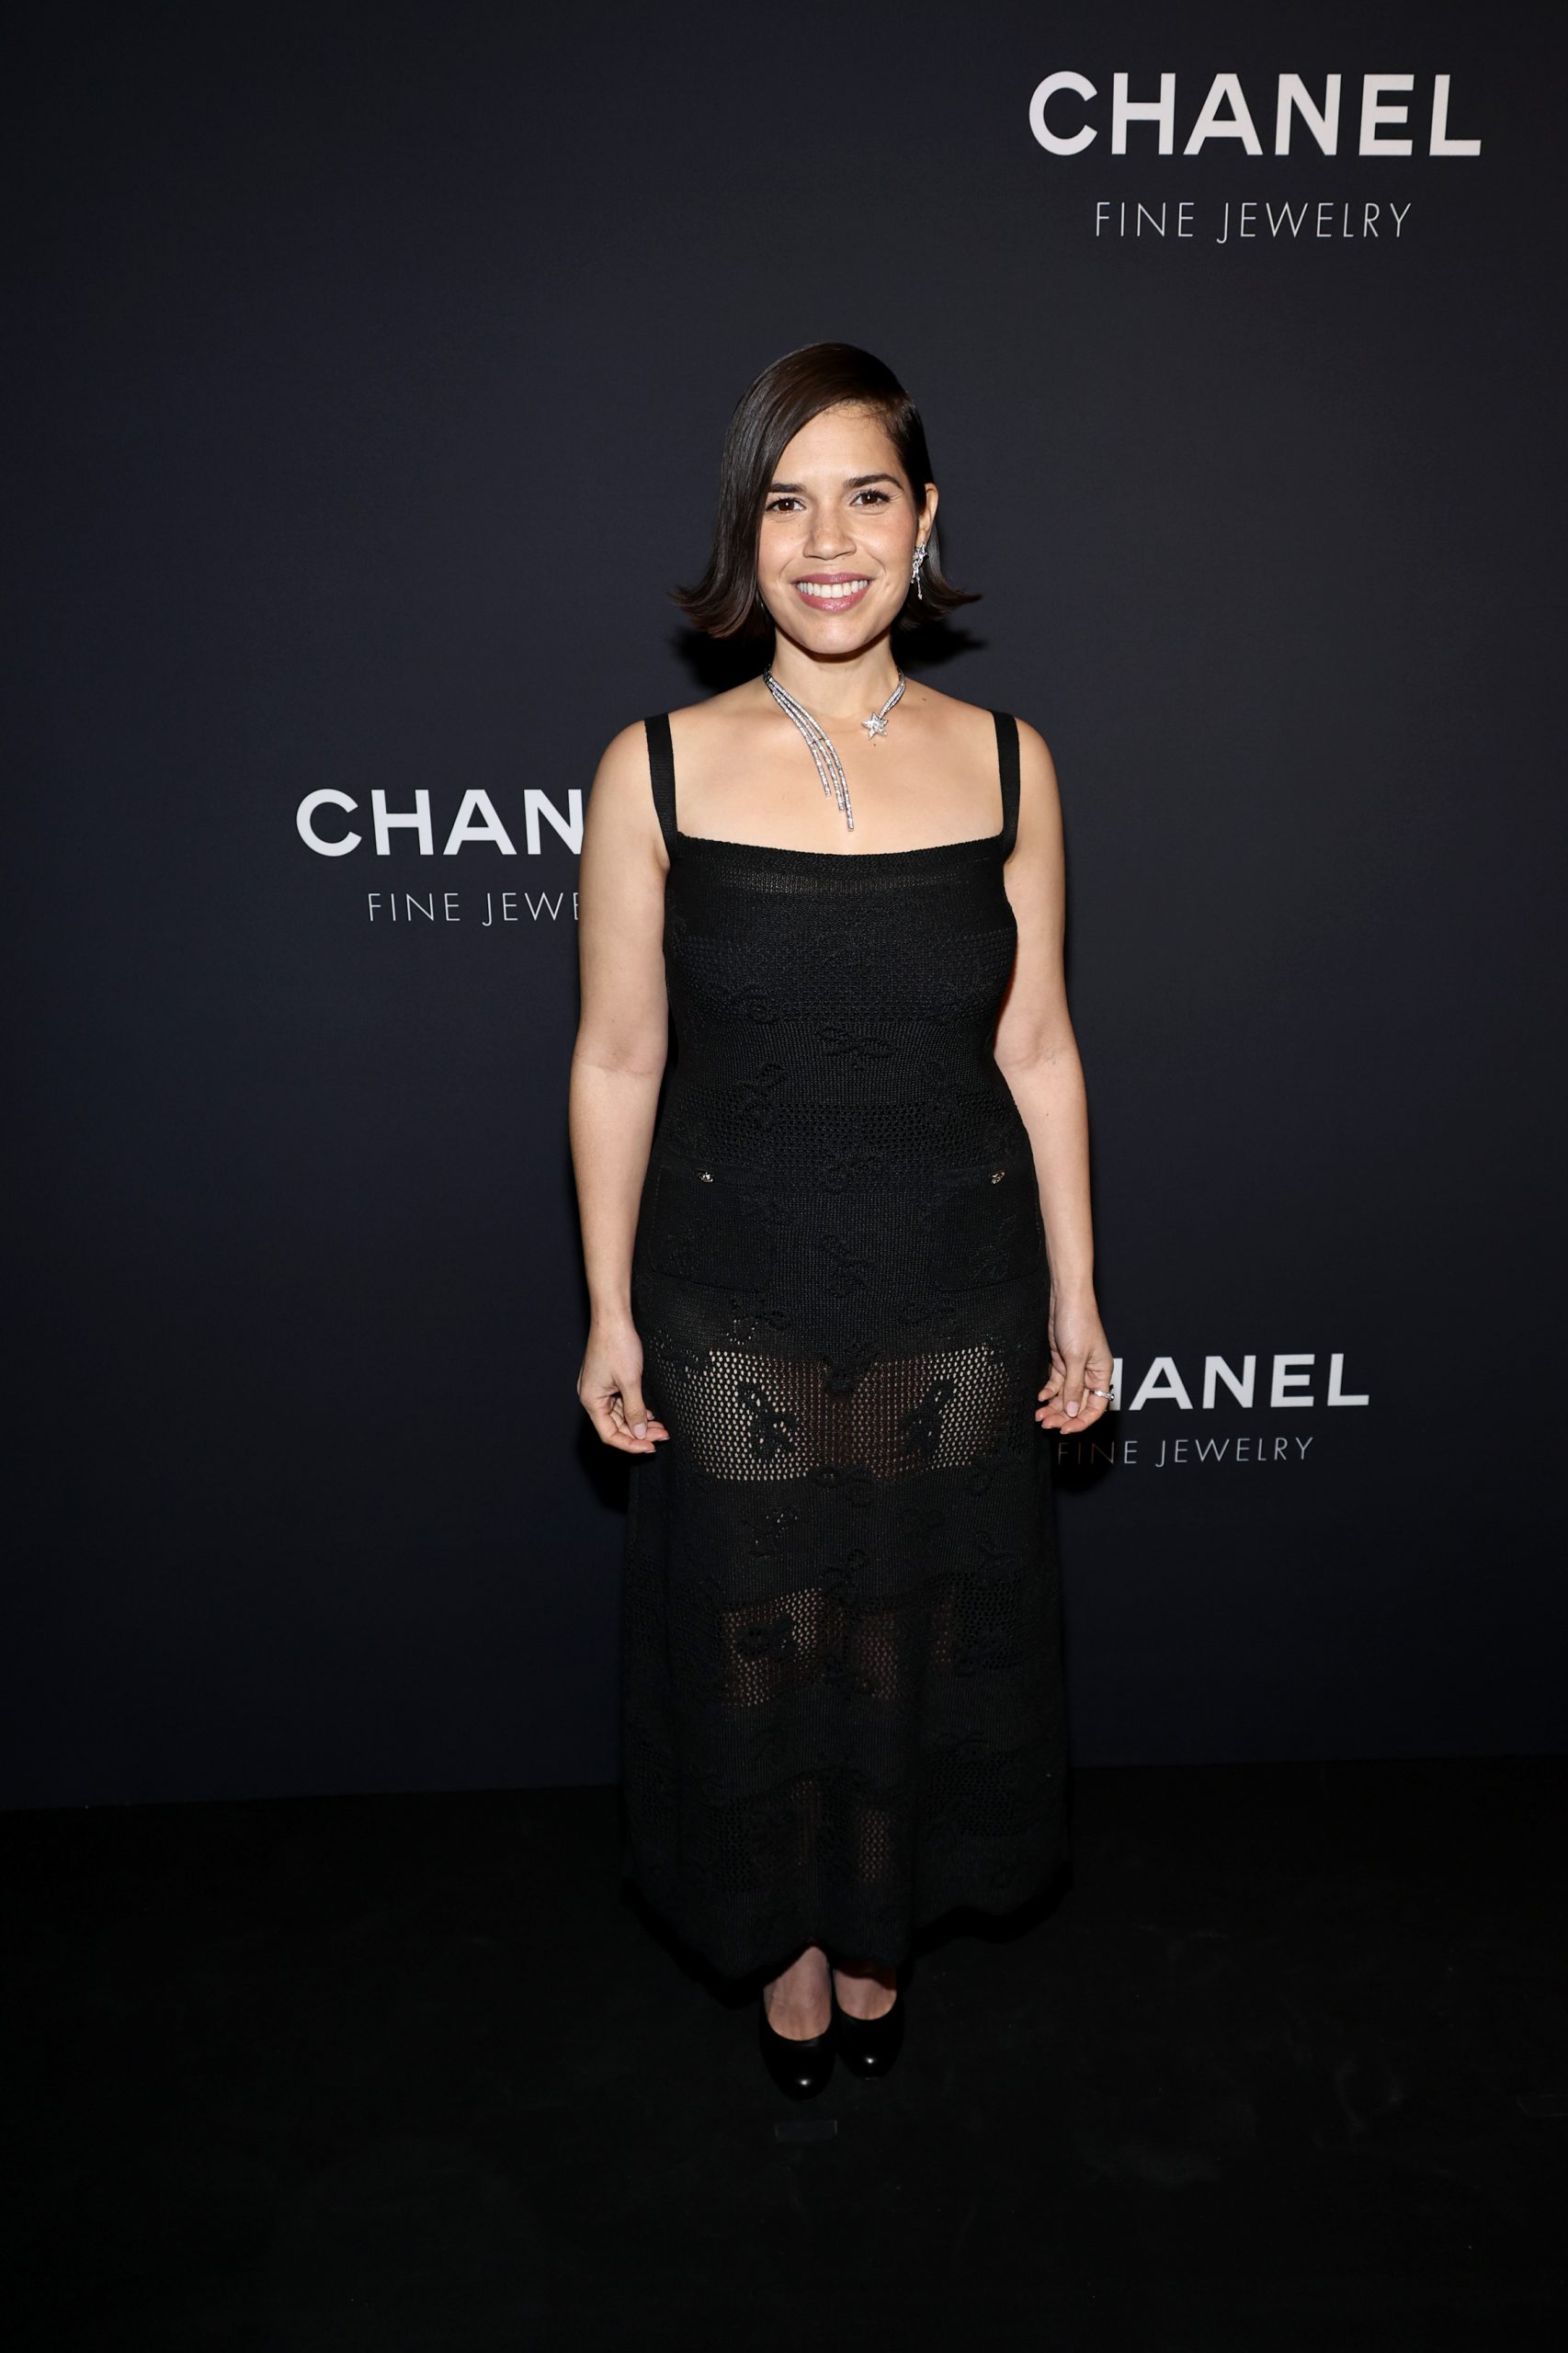 NEW YORK, NEW YORK - FEBRUARY 07: America Ferrera, wearing CHANEL, attends the CHANEL Dinner to celebrate the Watches & Fine Jewelry Fifth Avenue Flagship Boutique Opening on February 07, 2024 in New York City. (Photo by Jamie McCarthy/WireImage)